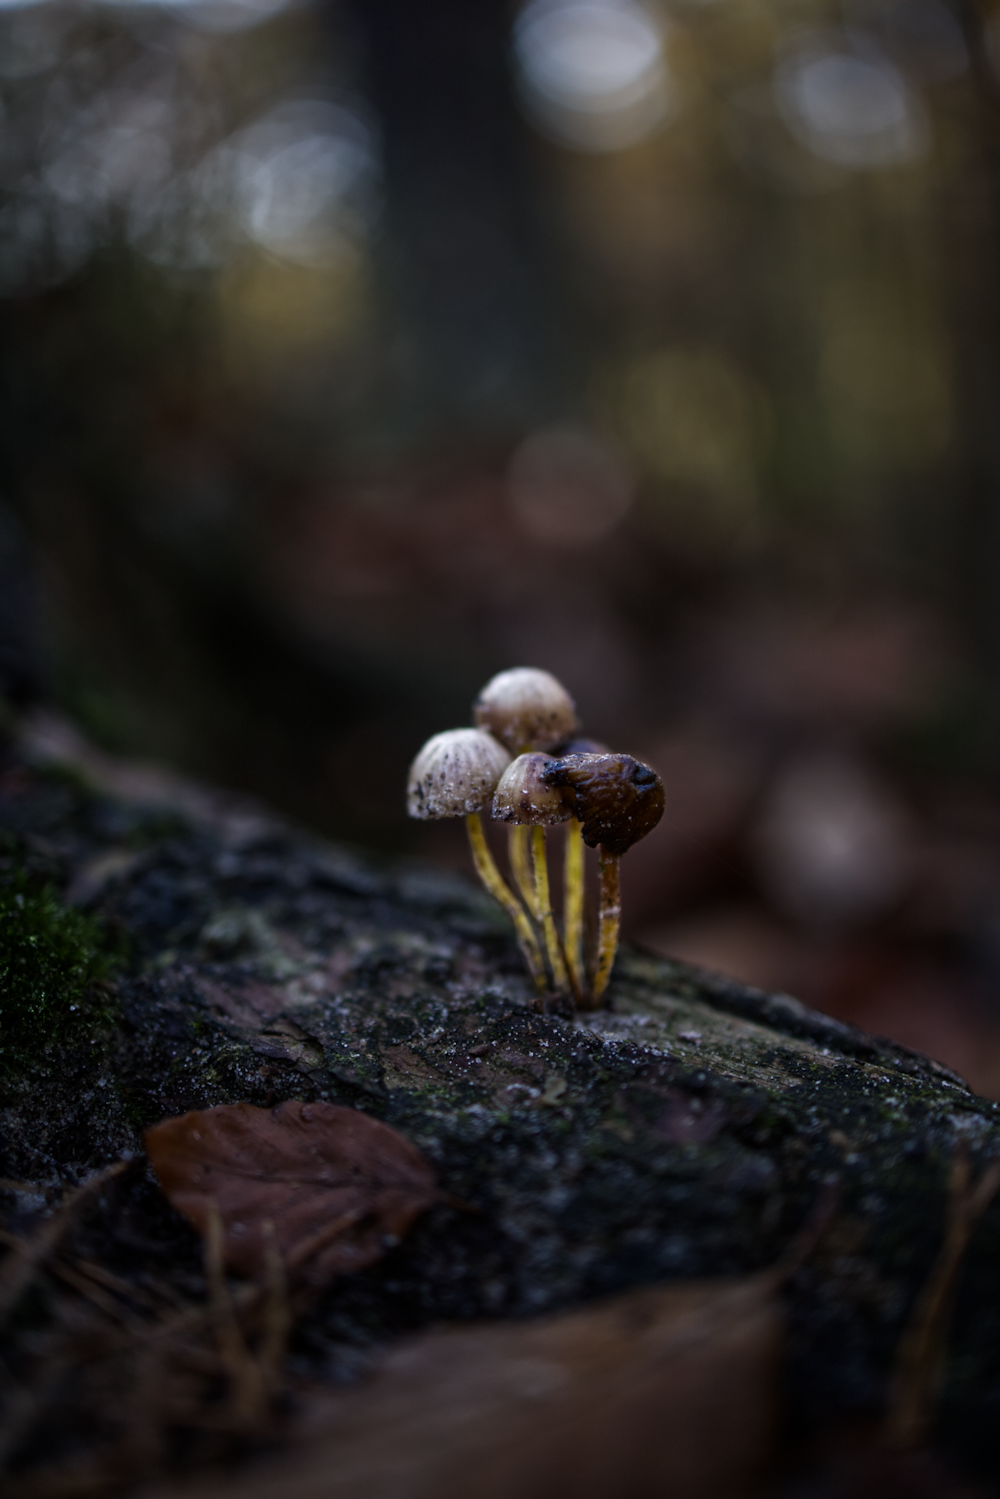 brown and white mushroom on brown tree trunk